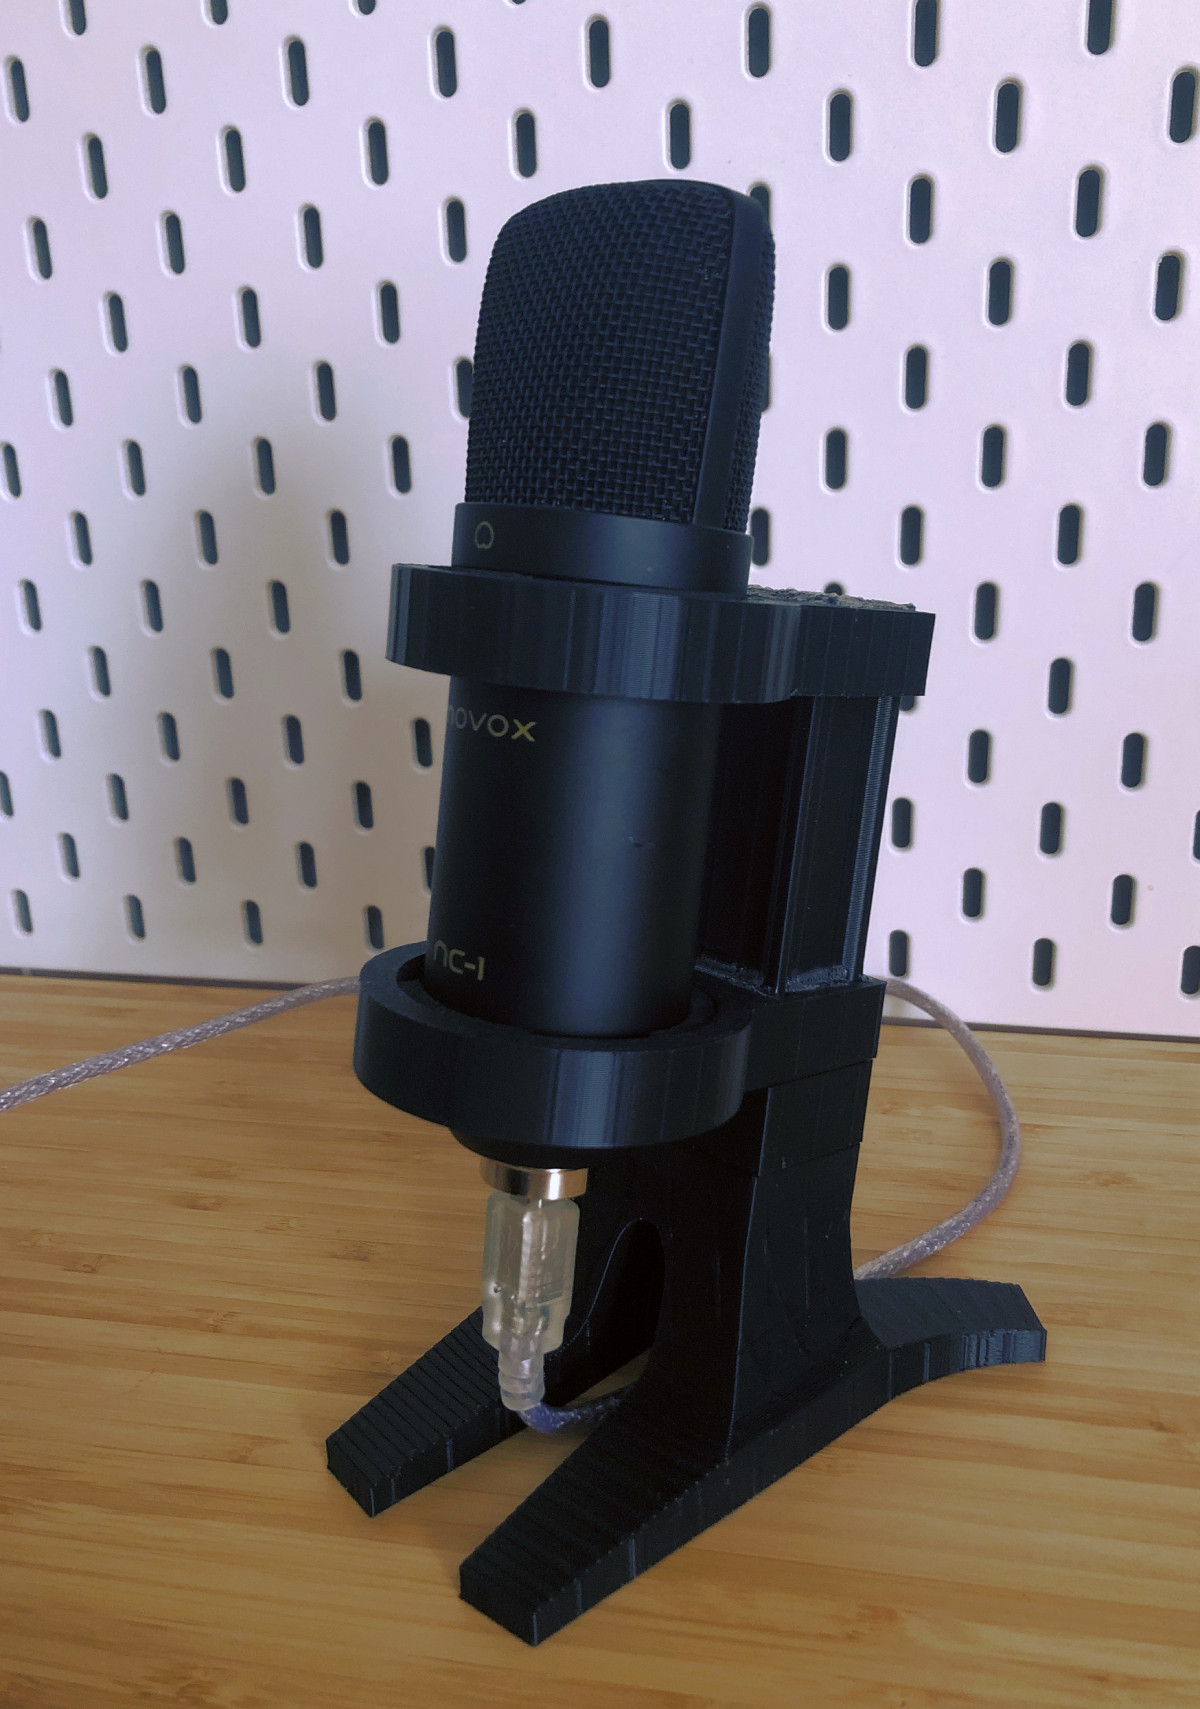 Assembled microphone stand